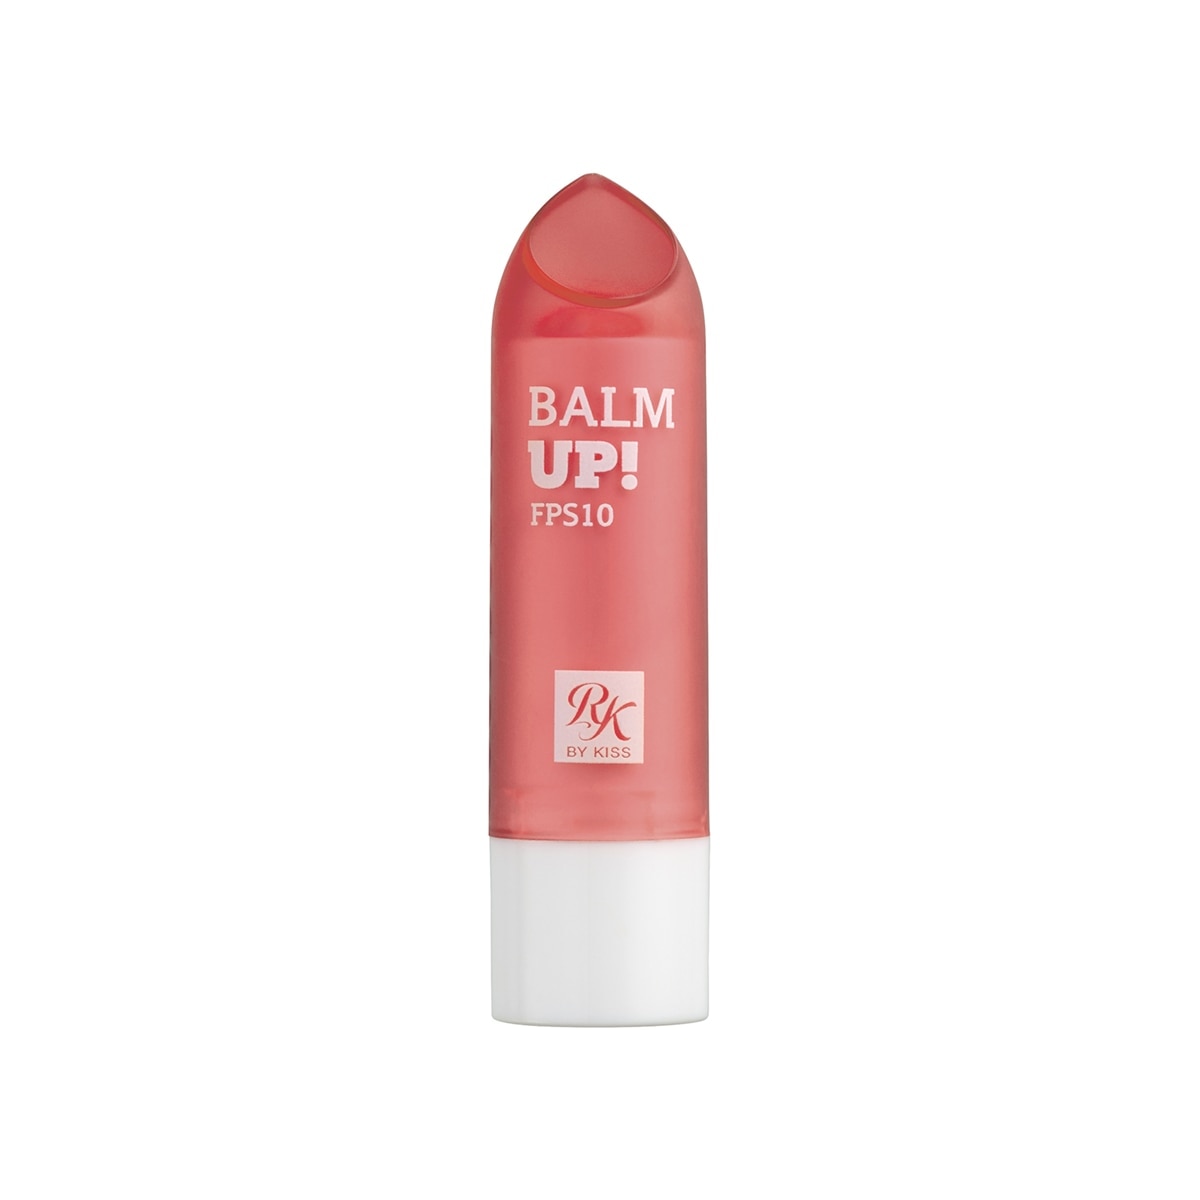 Protetor Labial Balm Up! RK by Kiss Cheer Up FPS10 Cor 02 4g